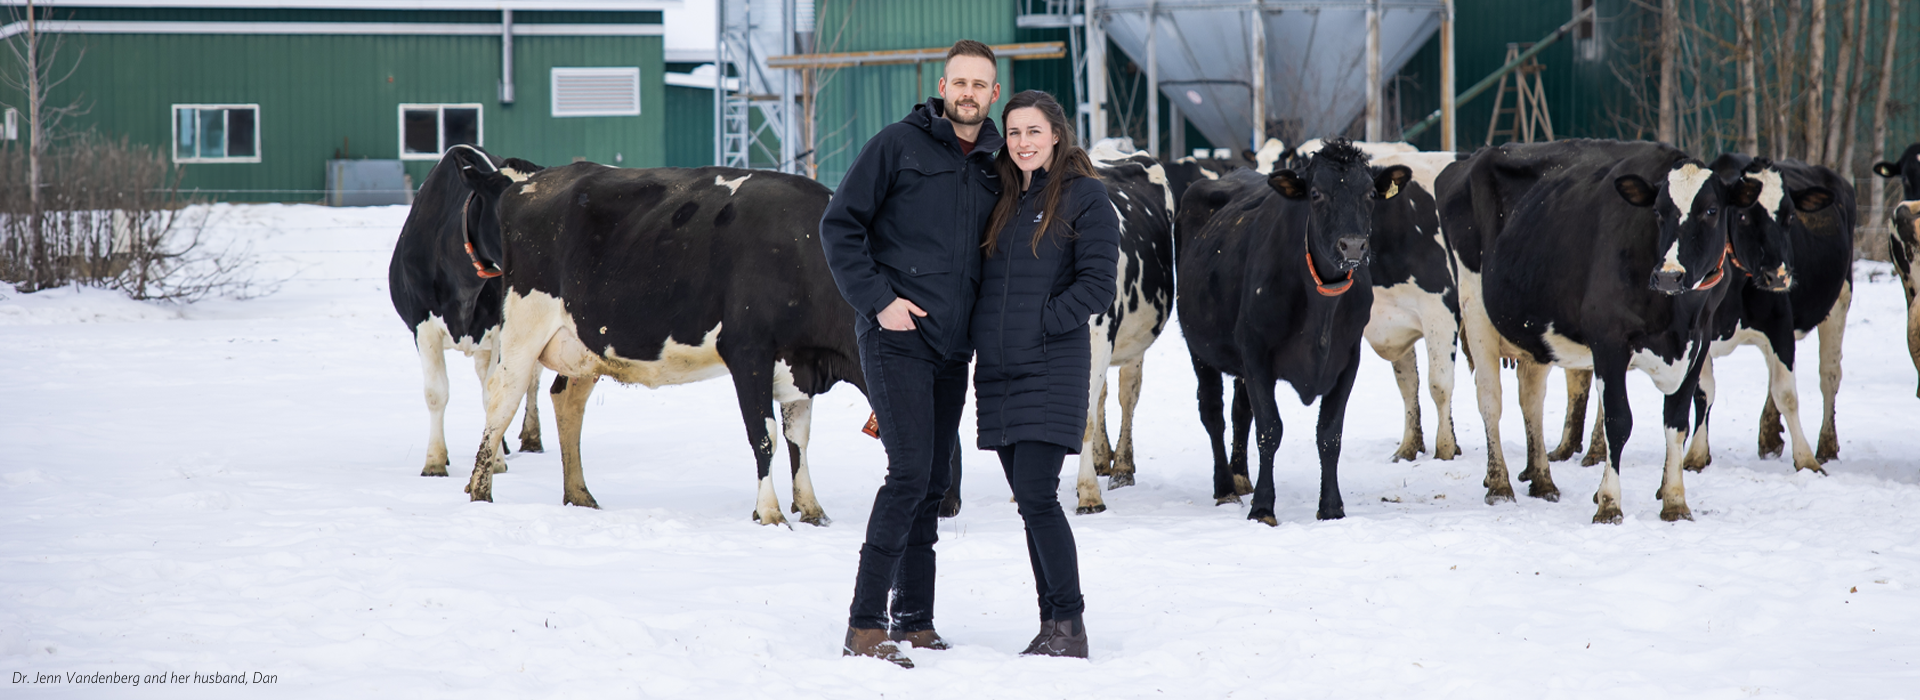 Dr. Jenn Vandenberg and her husband, Dan in front of their dairy farm.